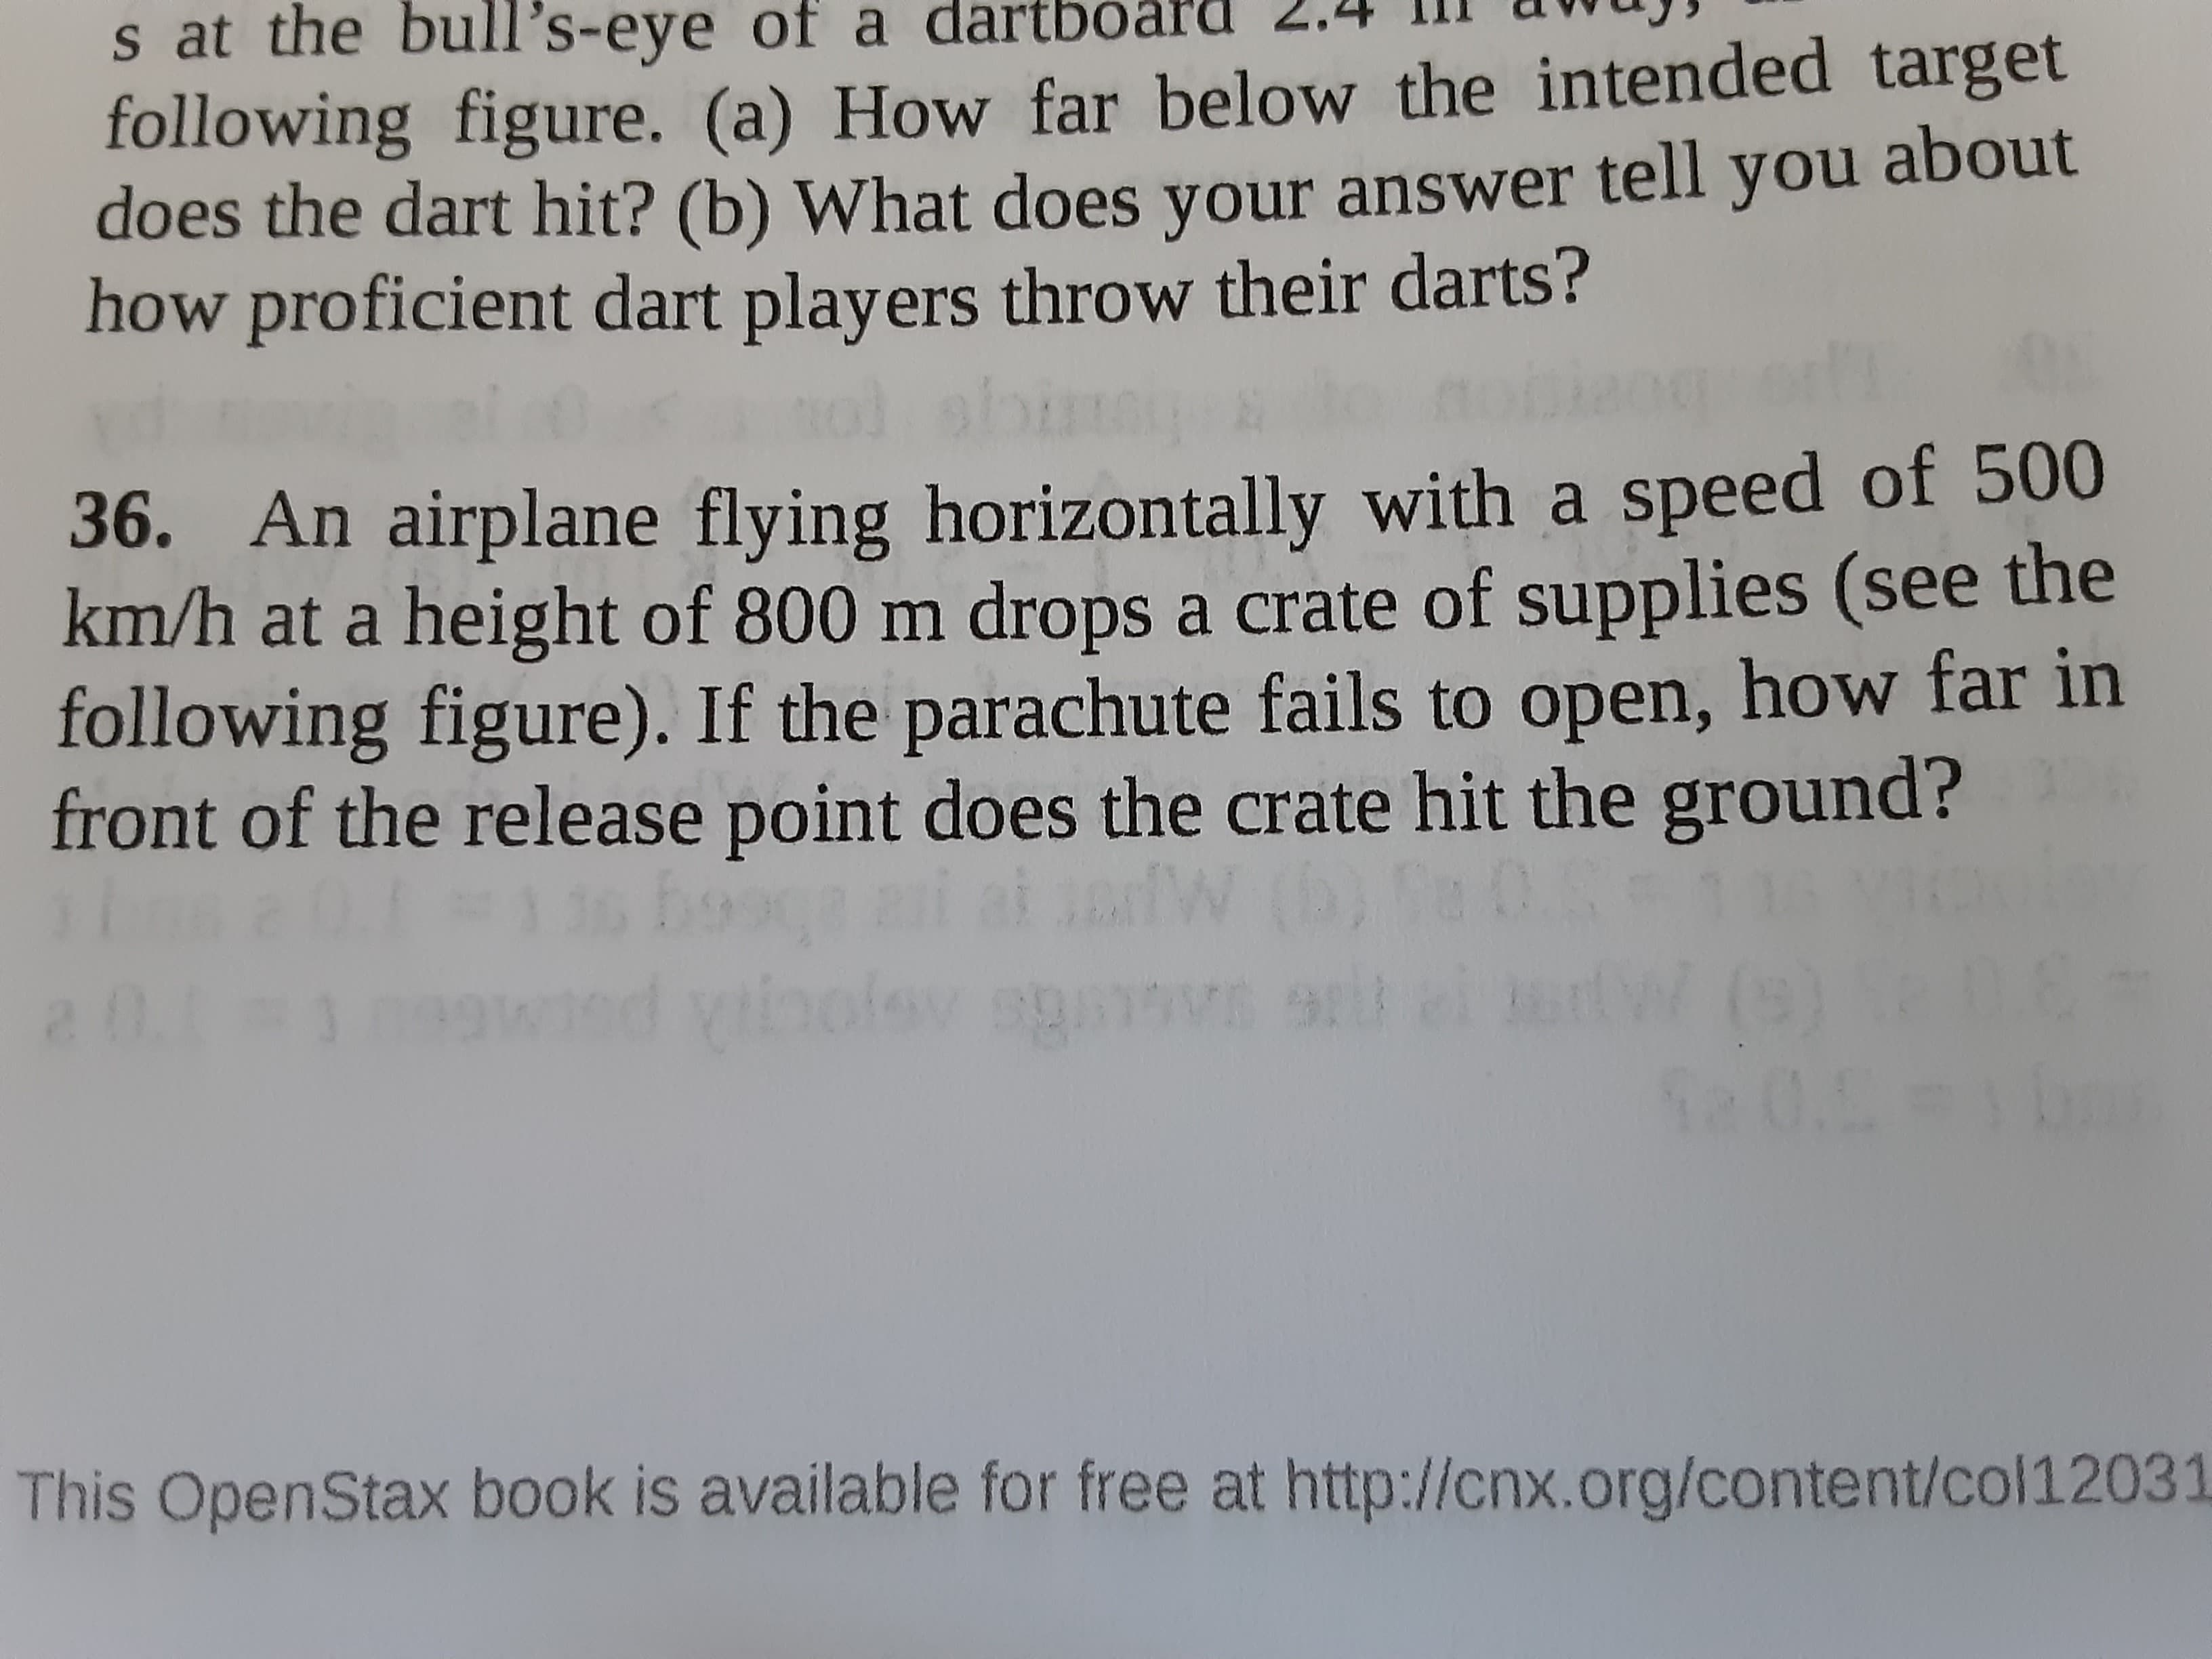 36. An airplane flying horizontally with a speed of 500
km/h at a height of 800 m drops a crate of supplies (see the
following figure). If the parachute fails to open, how far in
front of the release point does the crate hit the ground?
